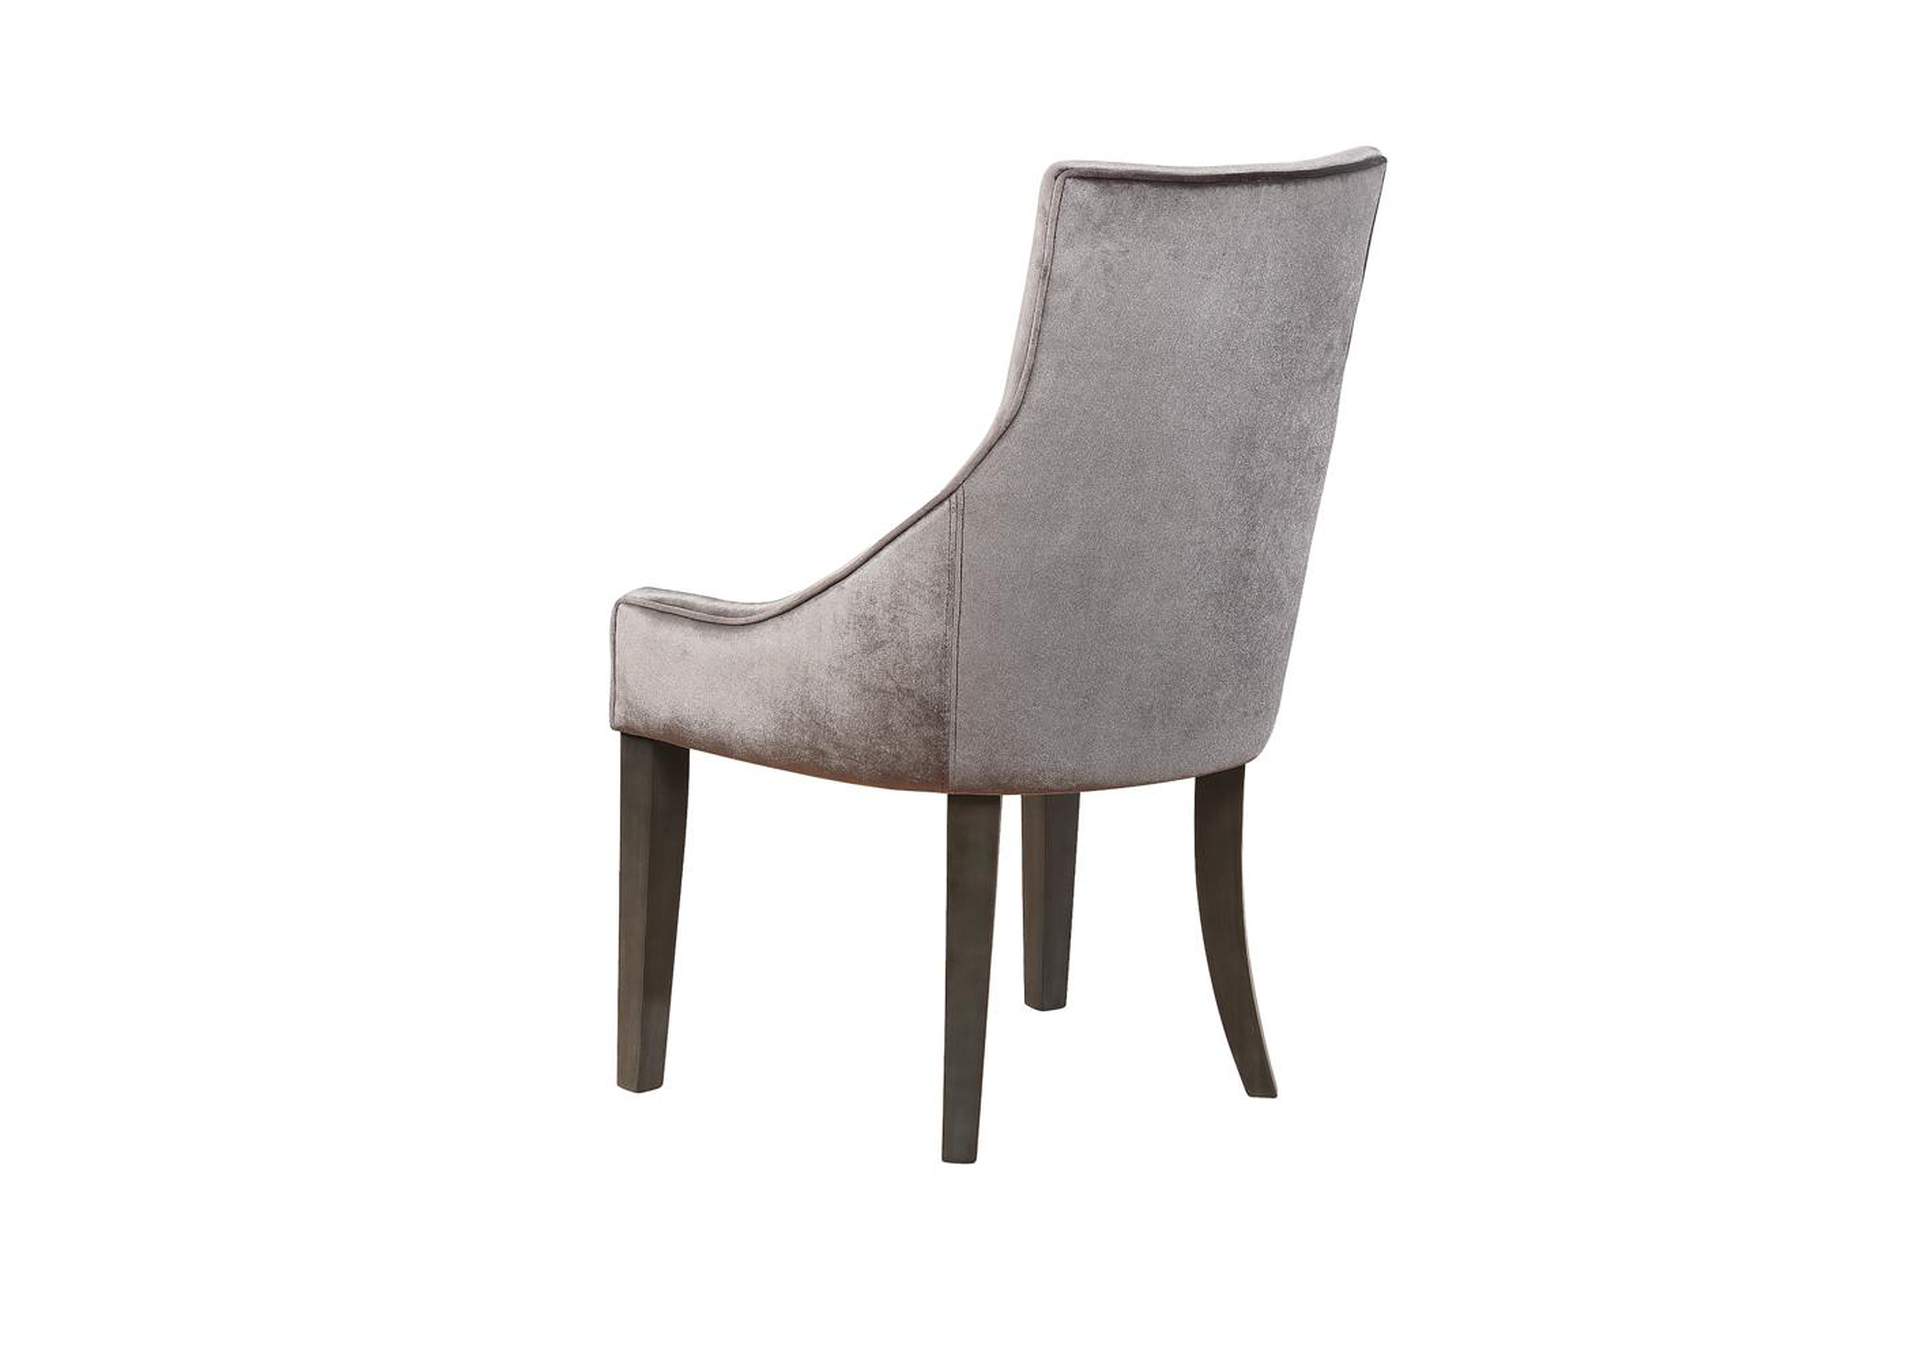 Phelps Traditional Grey Demi-Wing Chair,Coaster Furniture